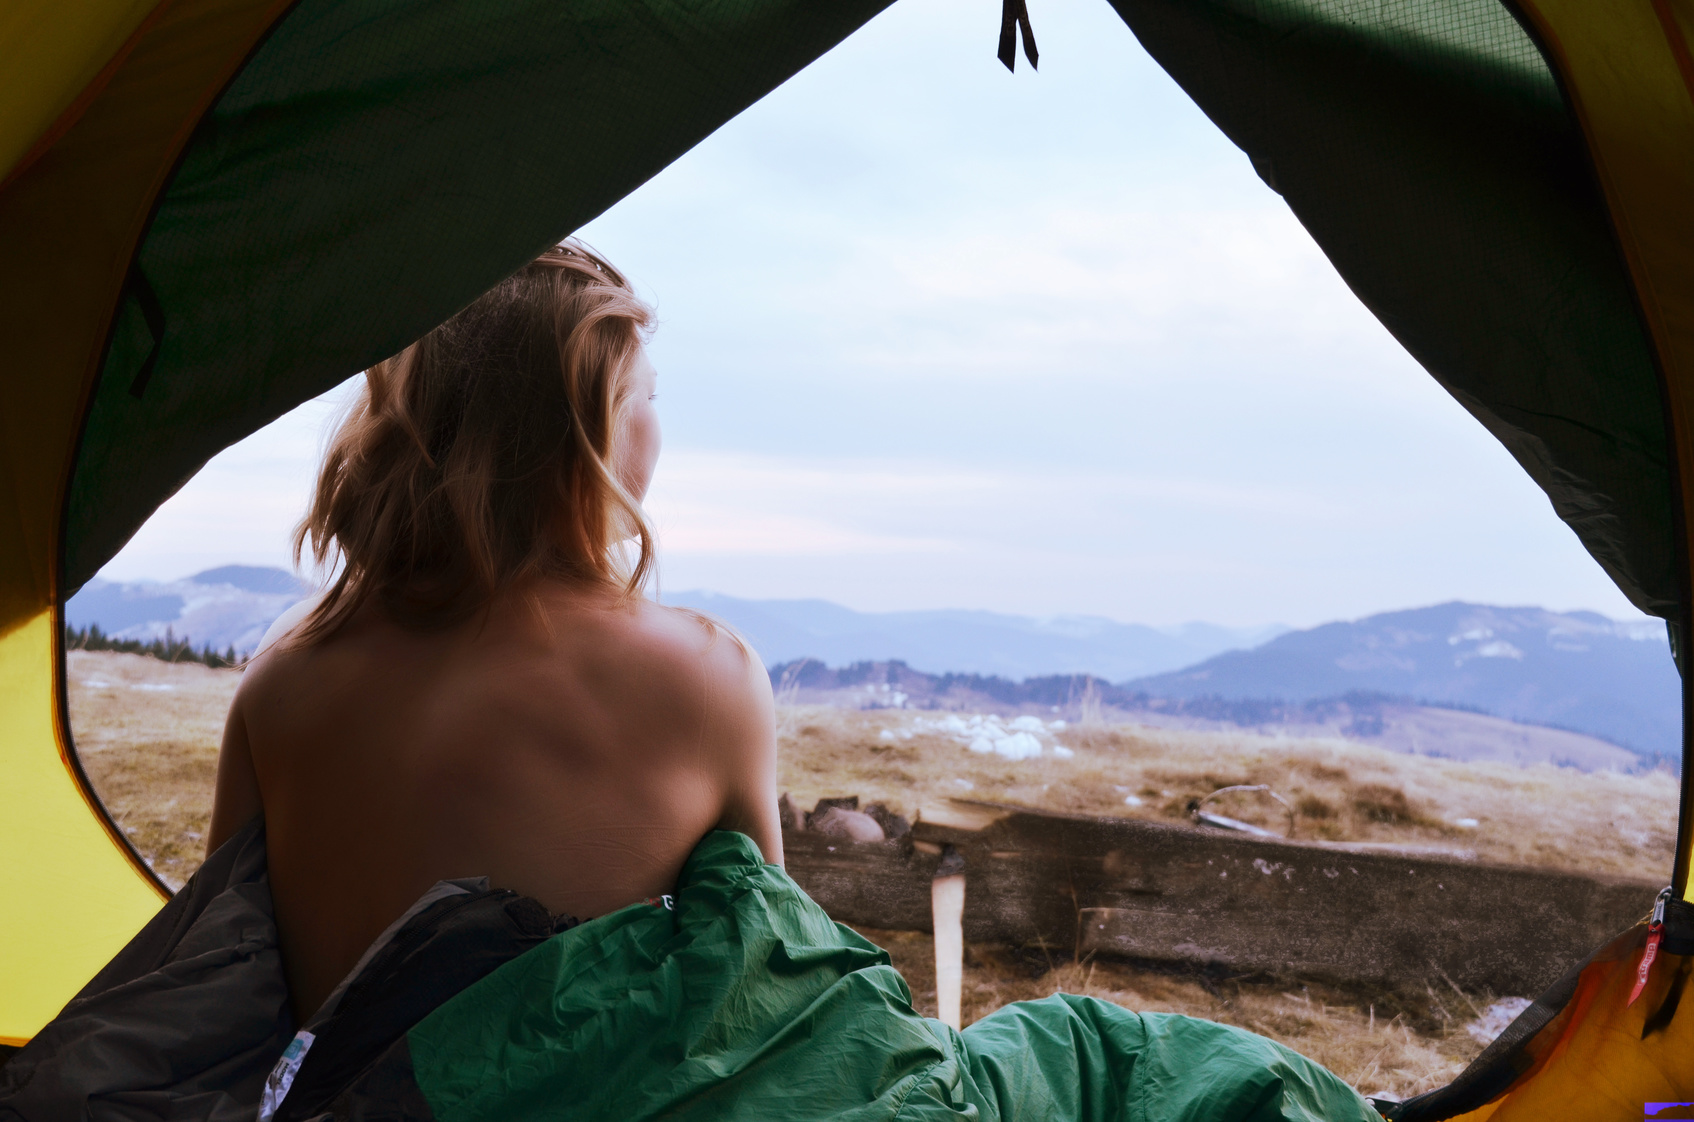 A young woman sitting in the tent with naked back, looking at the mountain landscape in winter